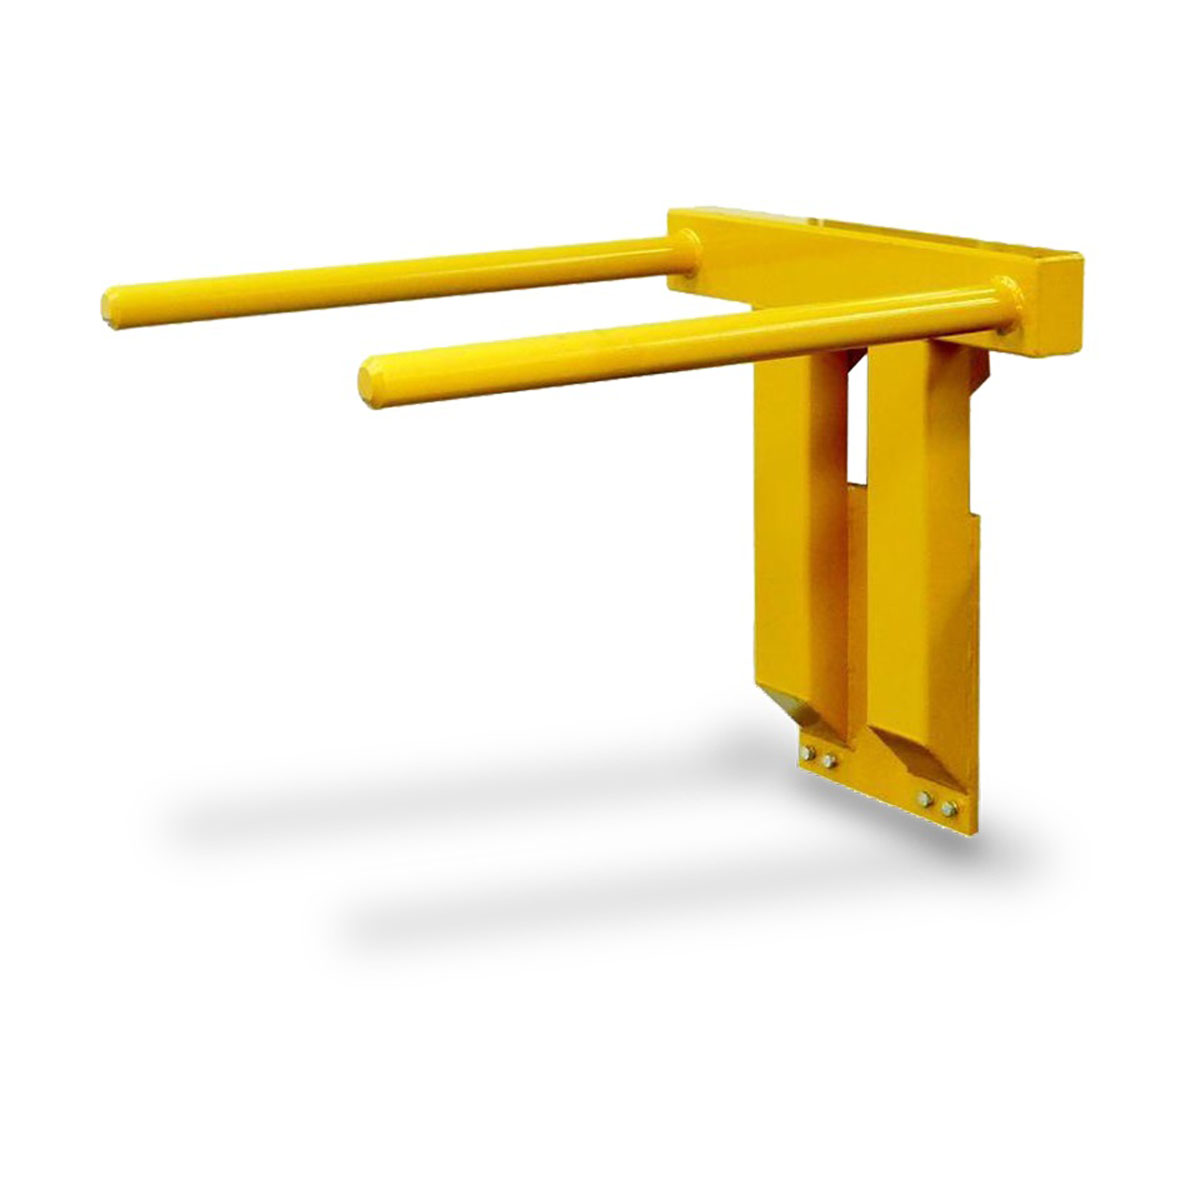 Buy Bulk Bag Prongs - Carriage Mount in Forklift Attachments from Astrolift NZ